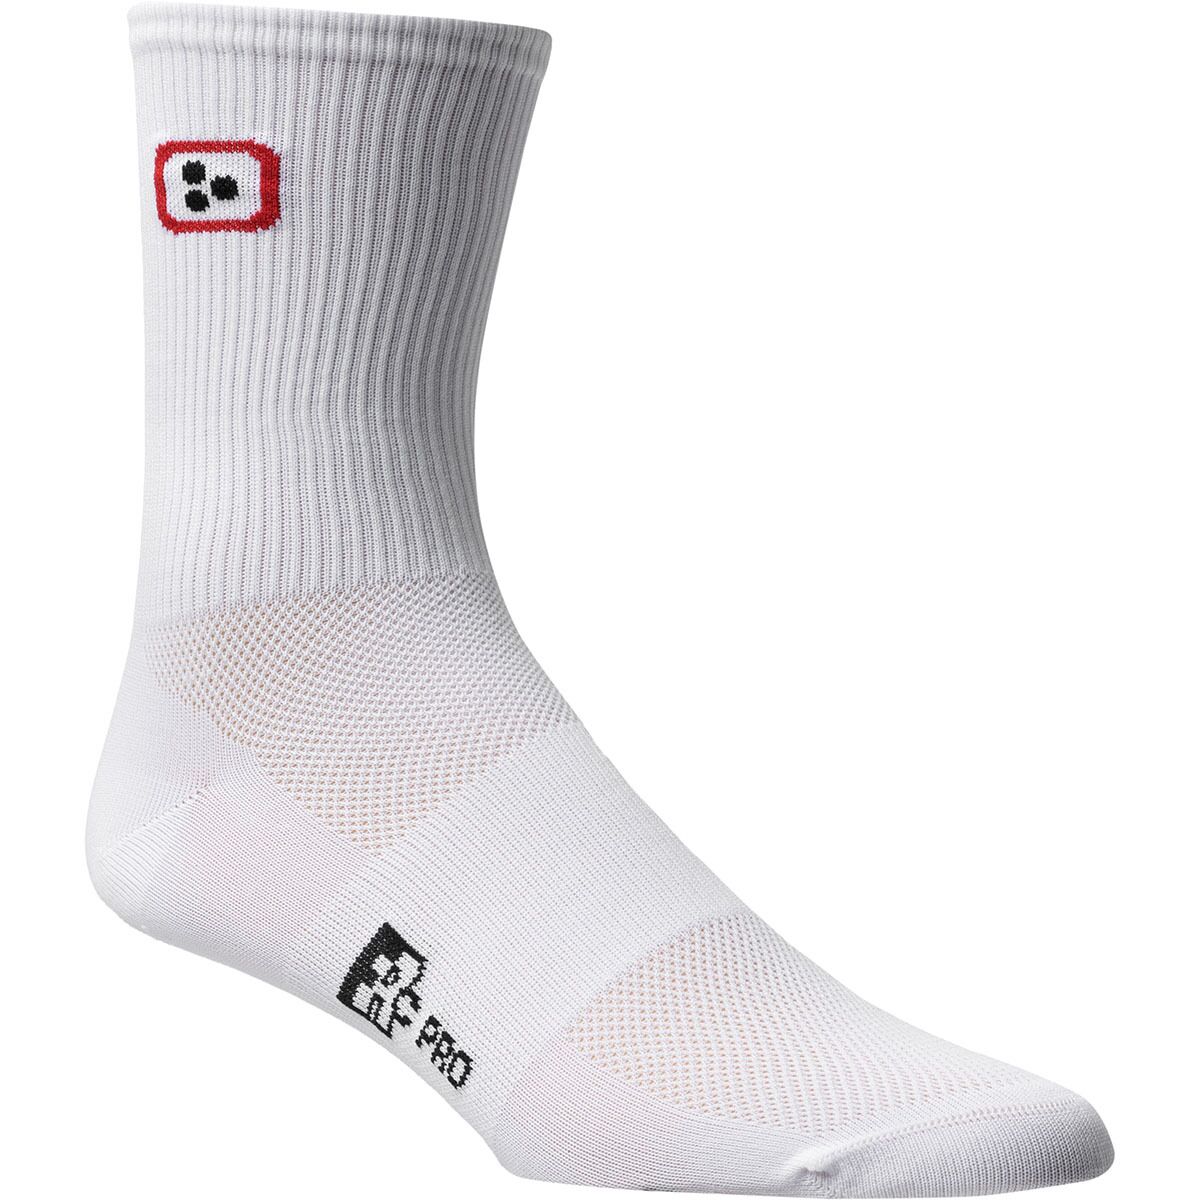 Competitive Cyclist Race Day Sock White/Red/Black, L - Men's